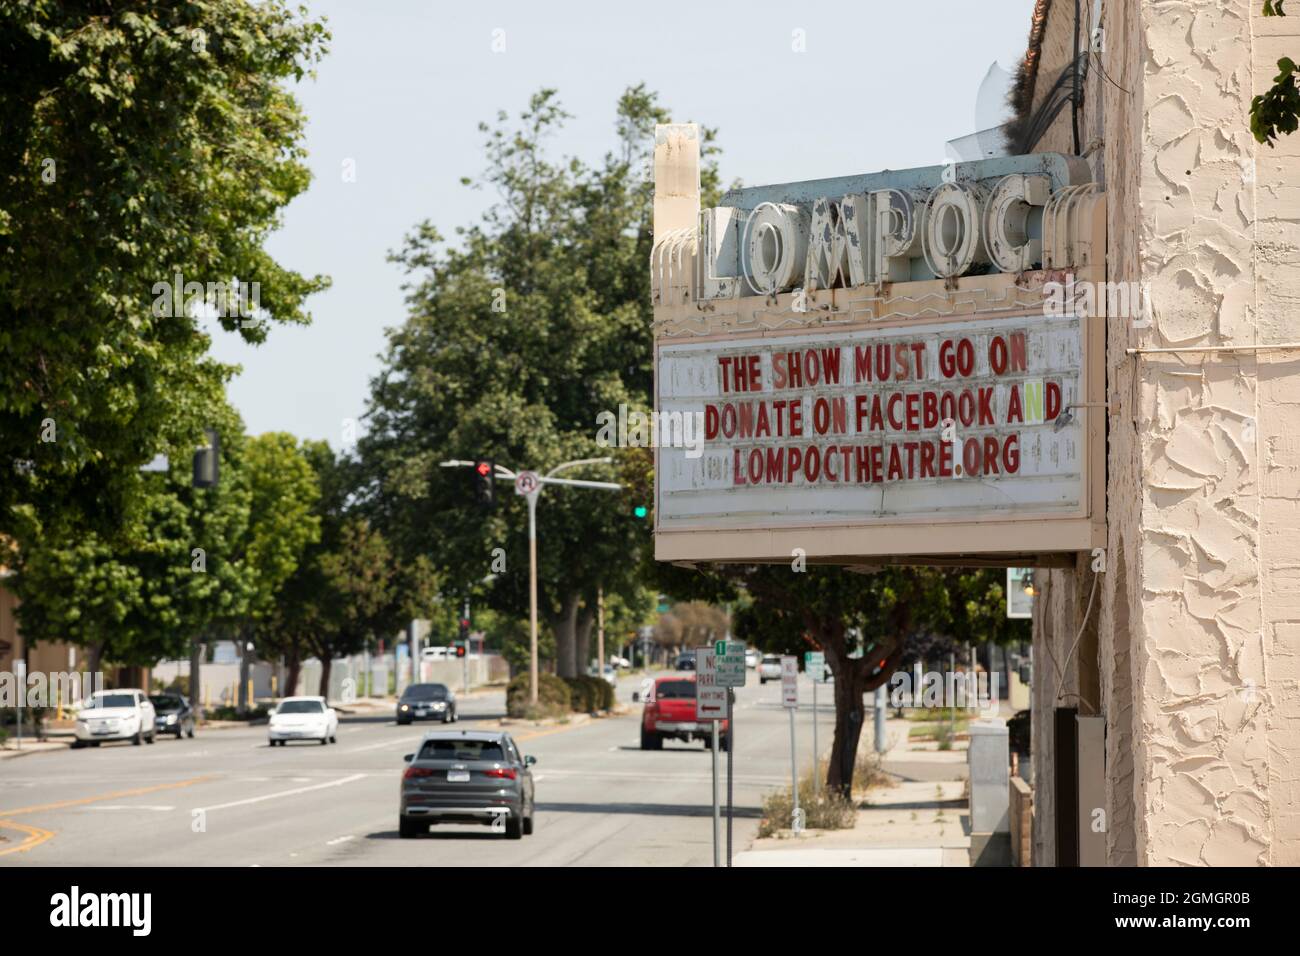 Lompoc, California, USA - July 25, 2021: Midday sun shines on the historic downtown Lompoc Theatre. Stock Photo